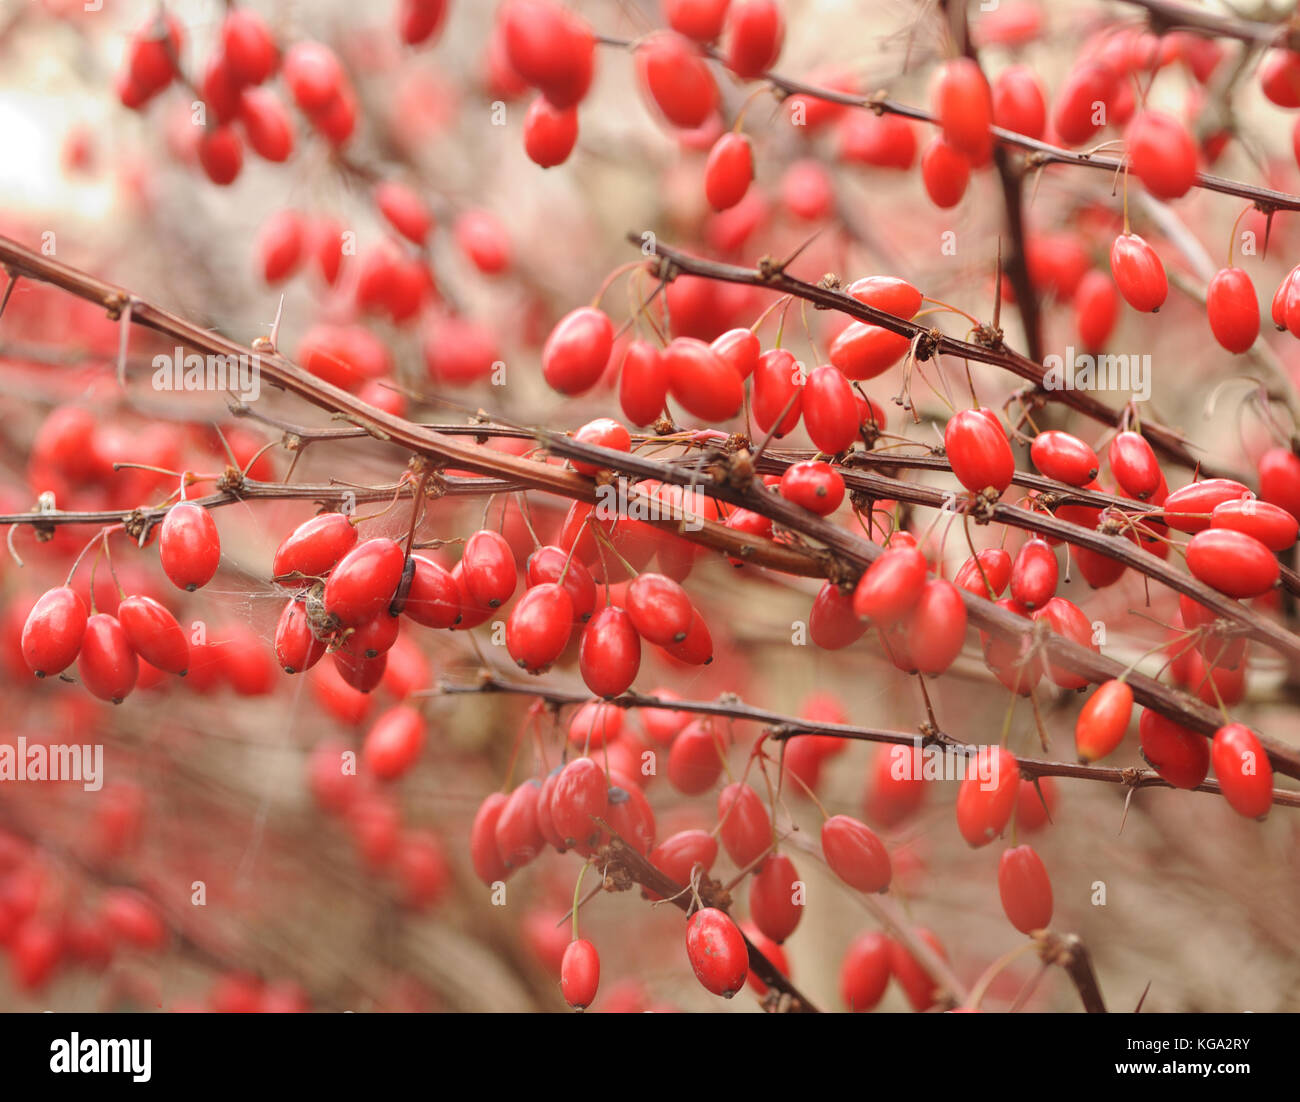 Red berries on a thorny berberis hedge after the leaves have fallen in autumn. Topsham, Devon, UK. Stock Photo